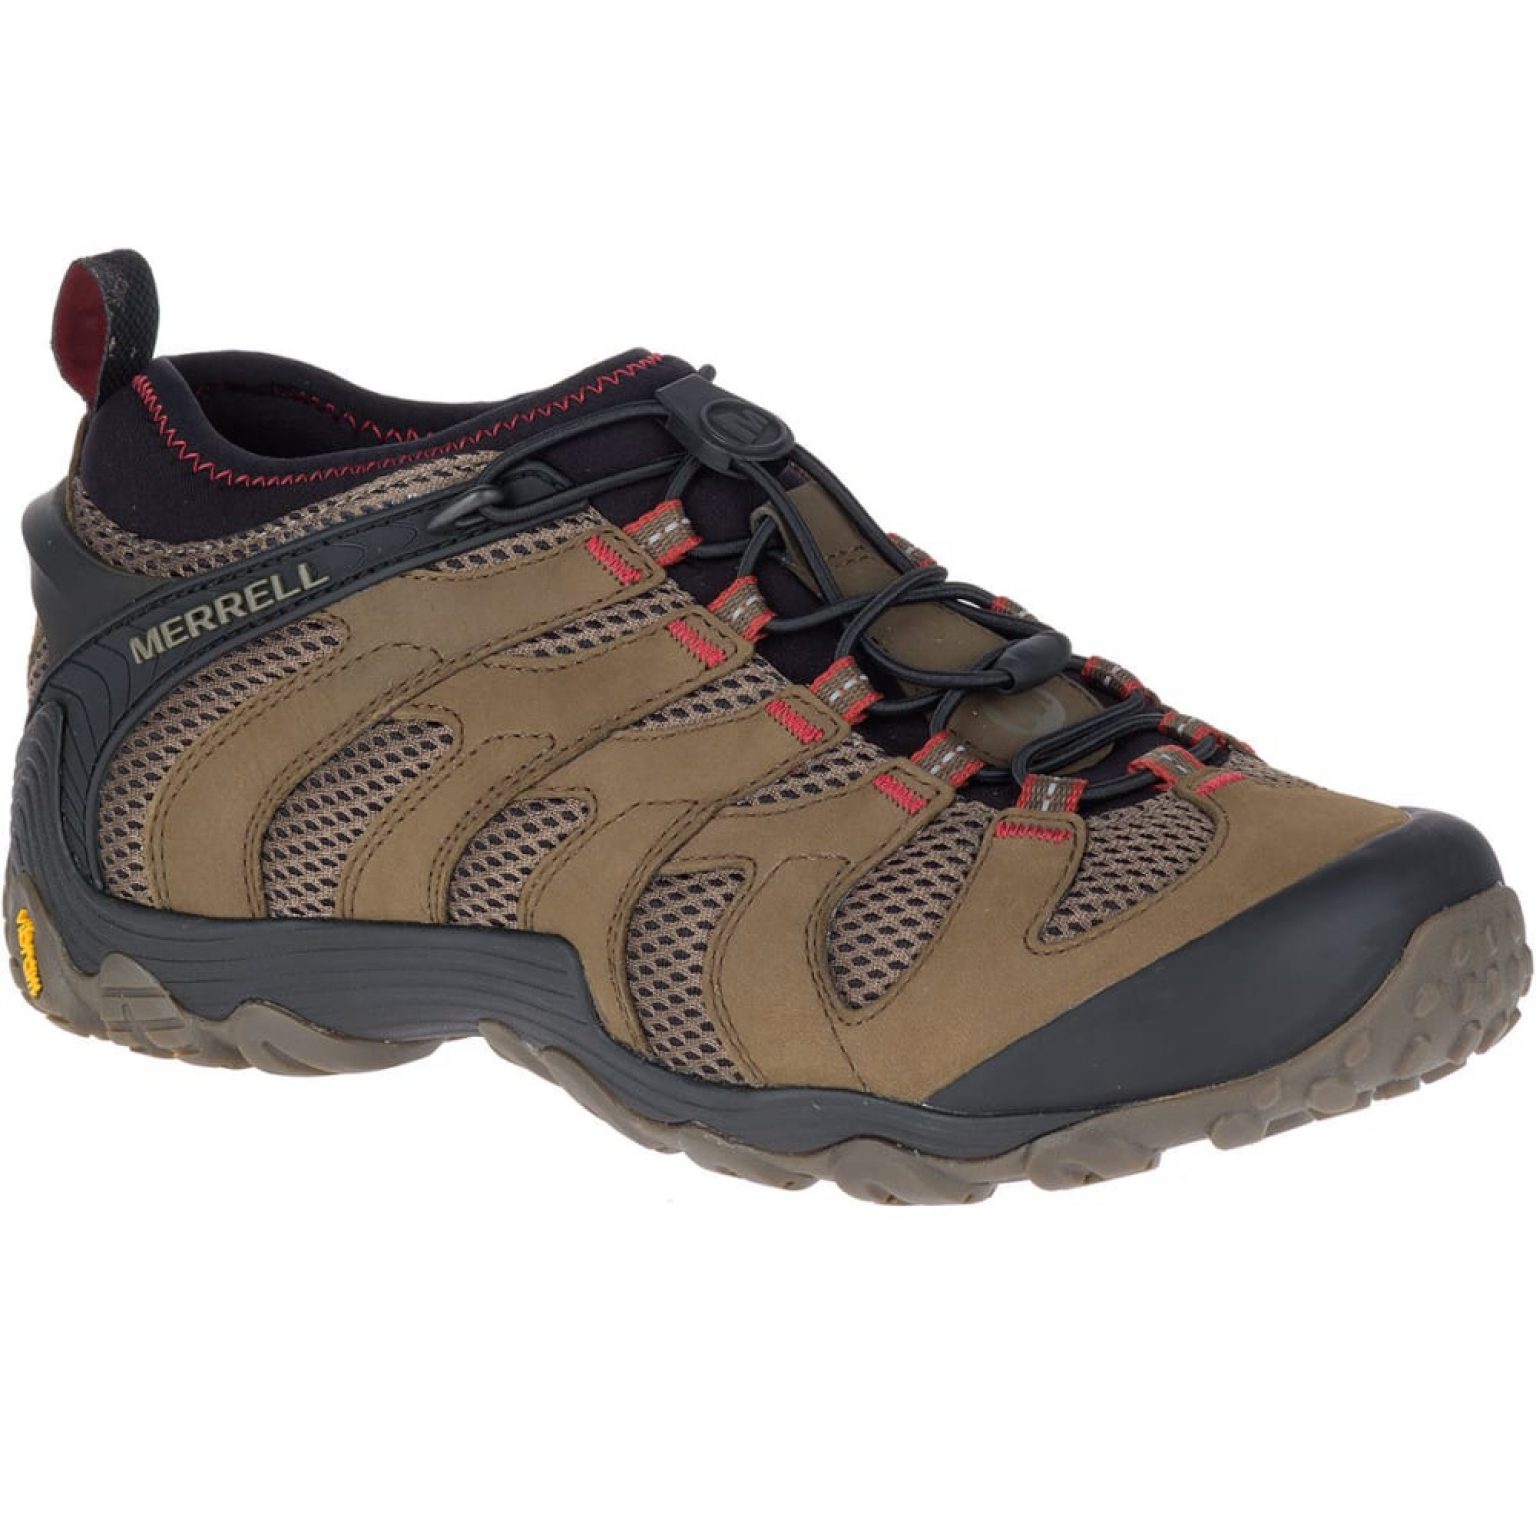 Up to 45% off Clearance Footwear from Salomon - DealVega